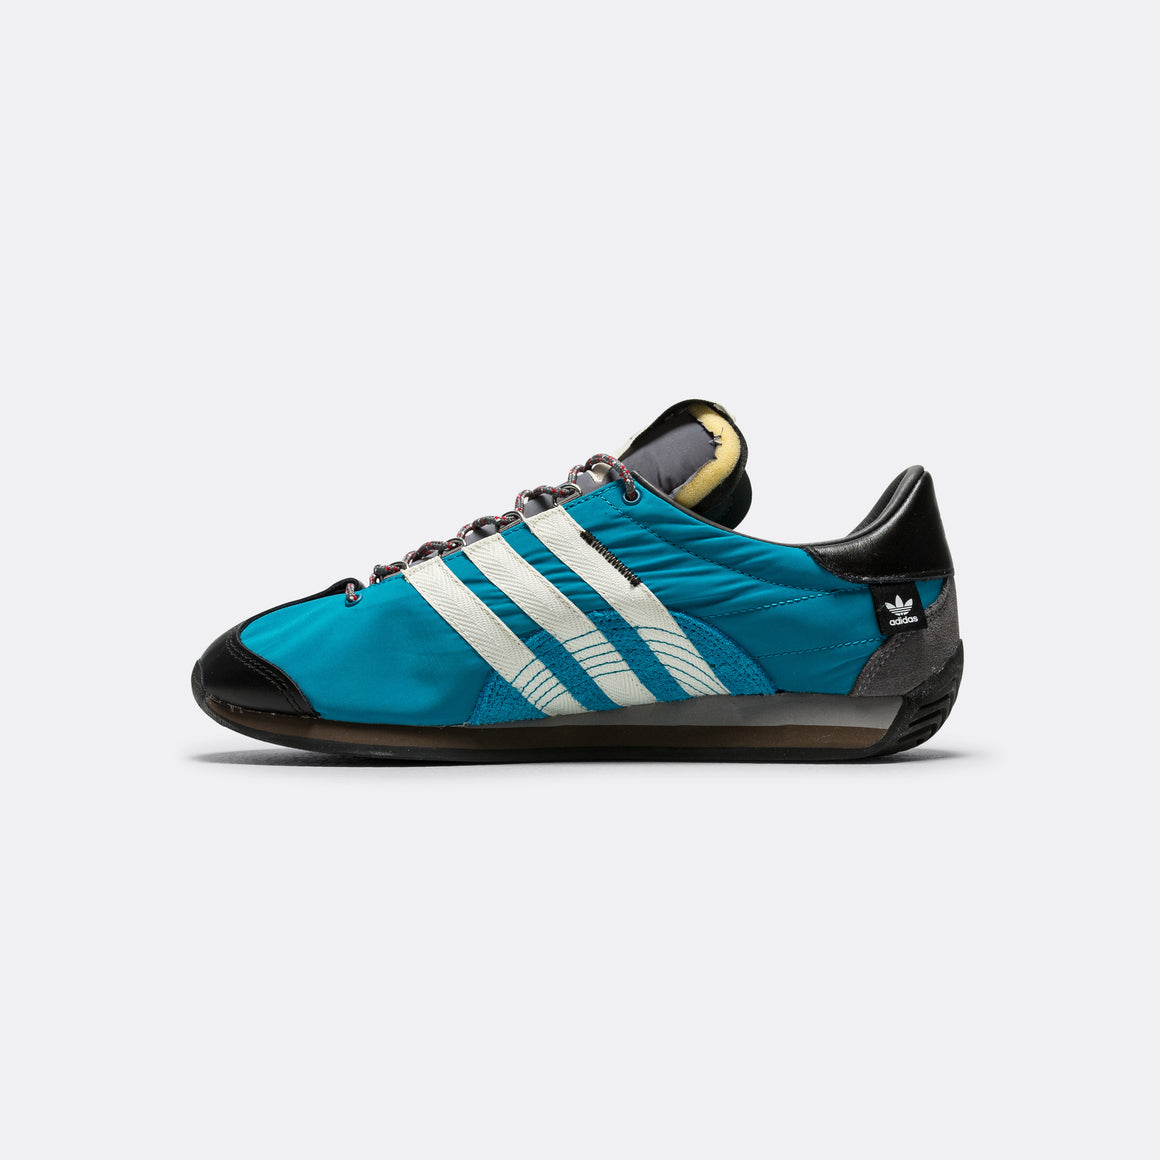 adidas - Country OG × SFTM - Actice Teal/Core Black - UP THERE